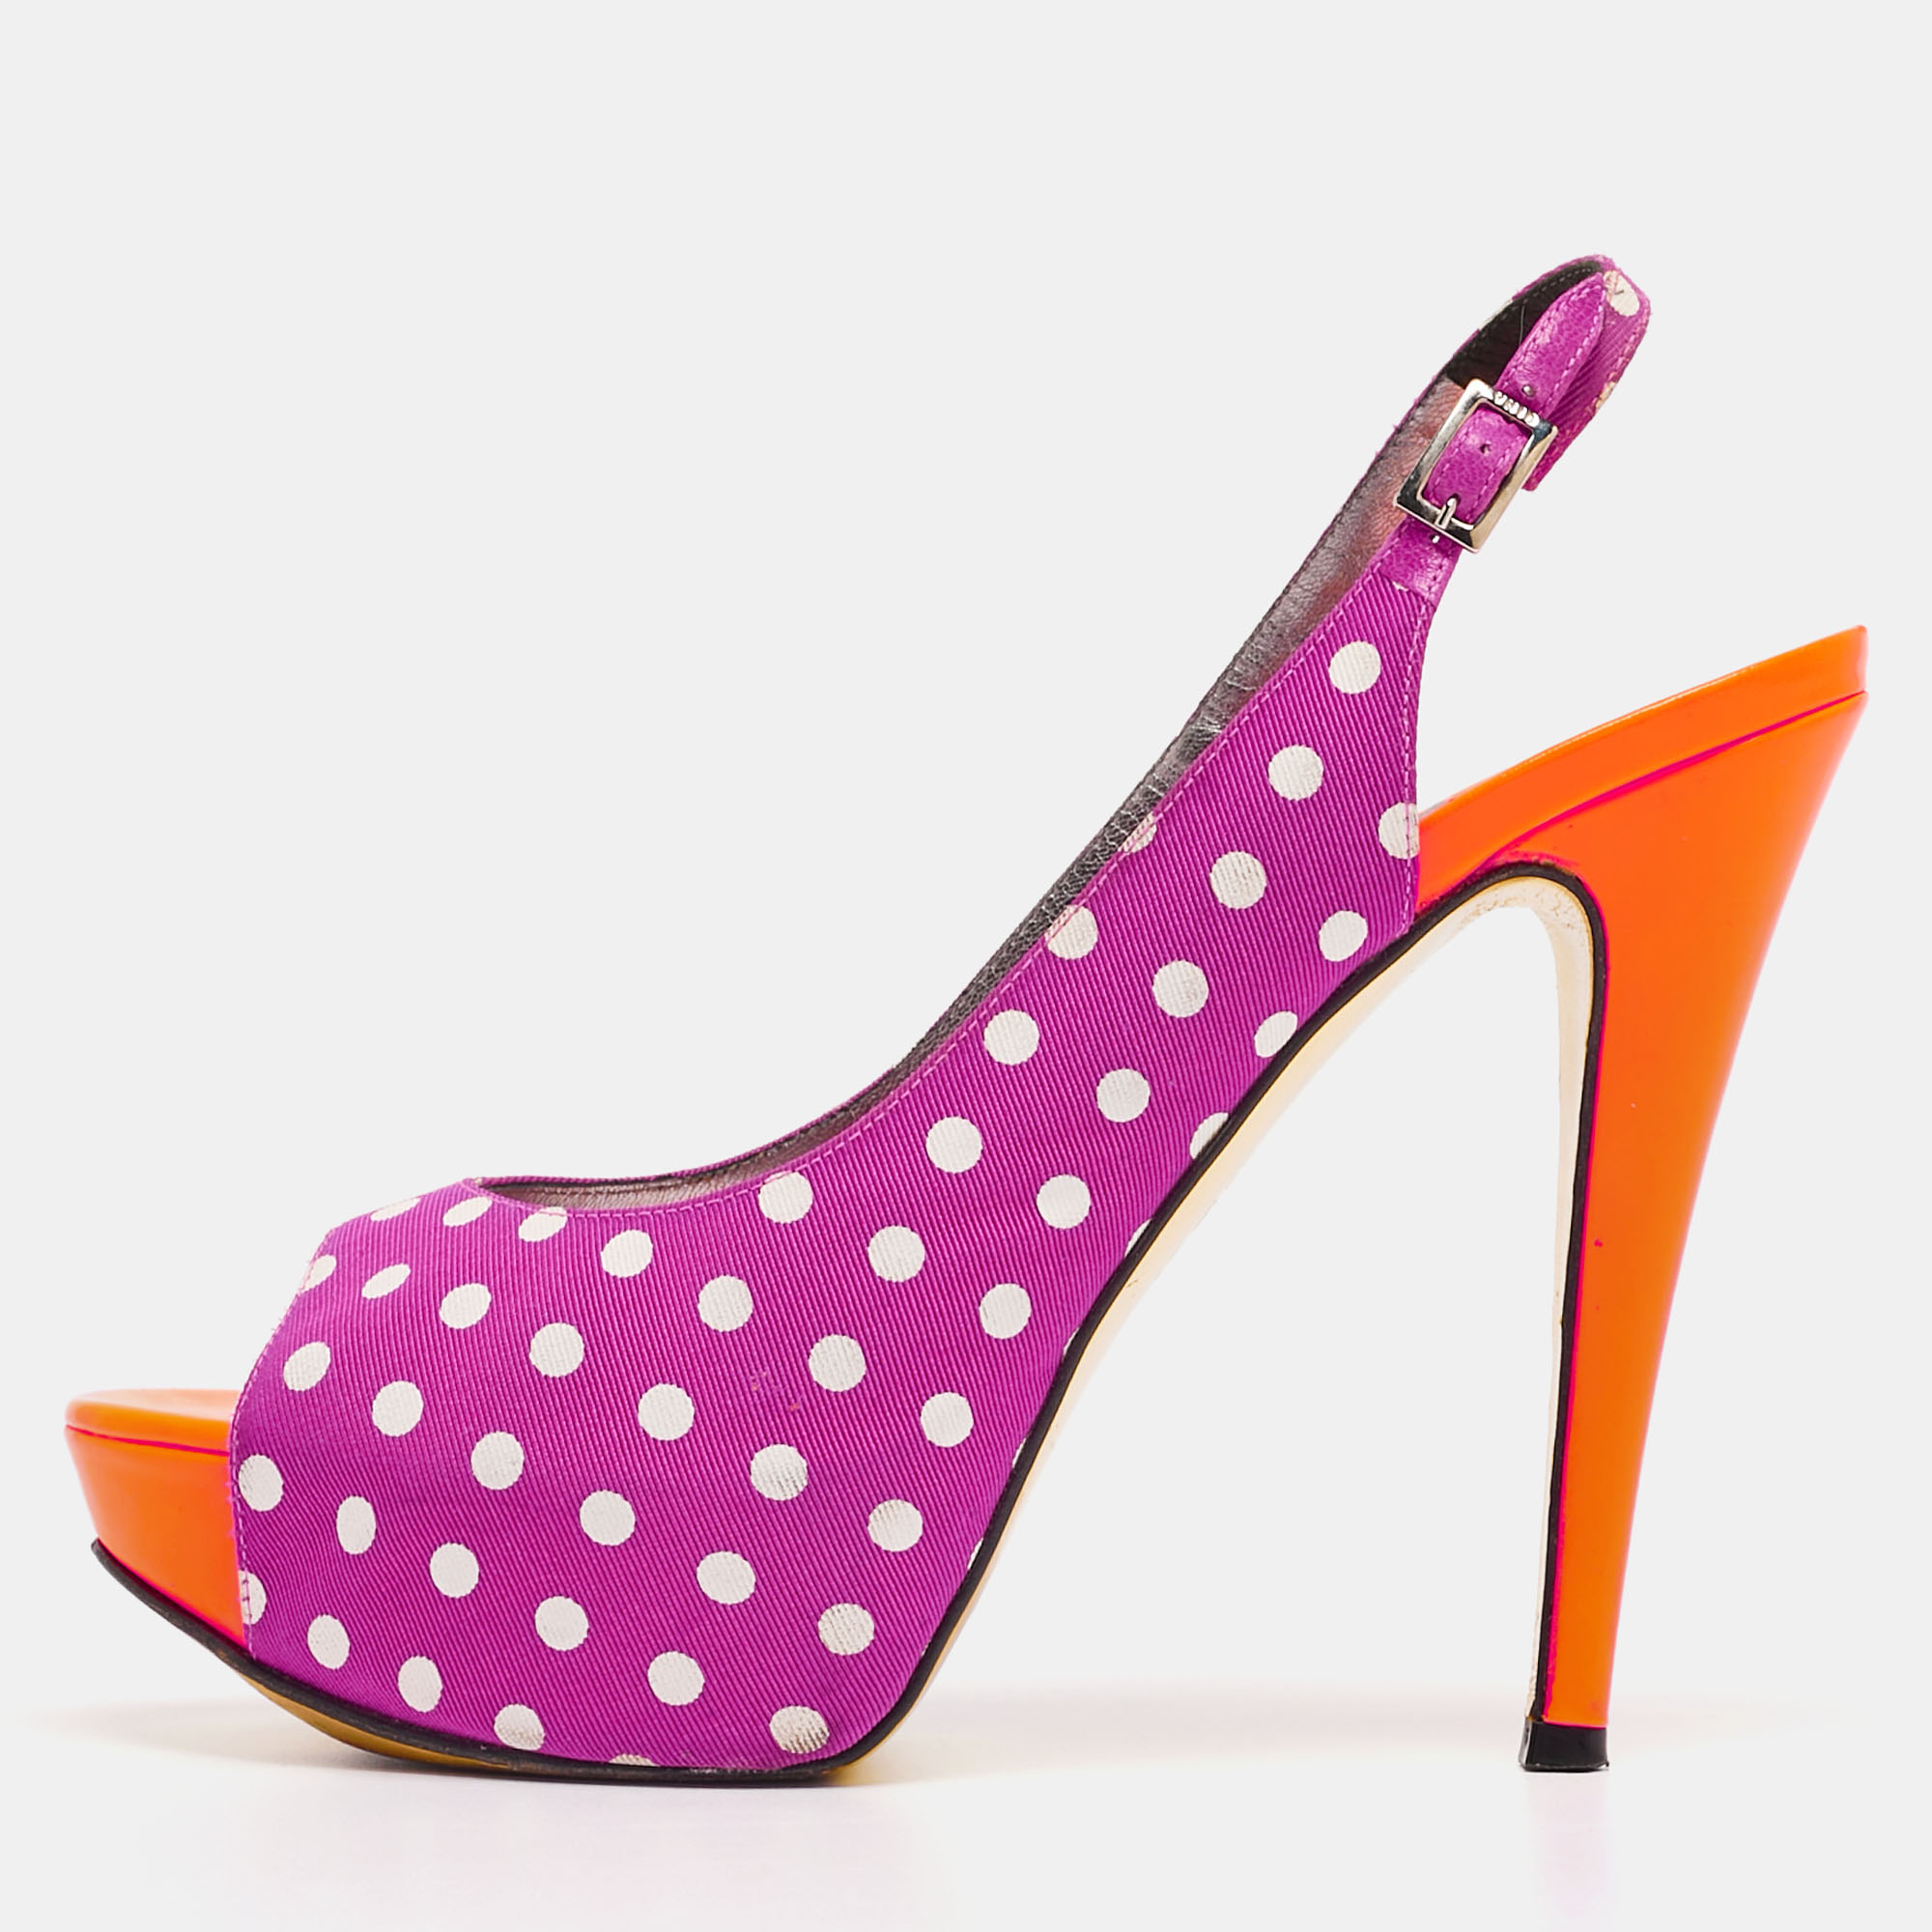 Designed for day time parties and events these Gina pumps are one for the fun and flirty woman who is not afraid to experiment Constructed in polka dot printed canvas these peep toe pumps are accented with blue leather insoles for an added pop of color along with the comfortable platforms to balance the high heels.